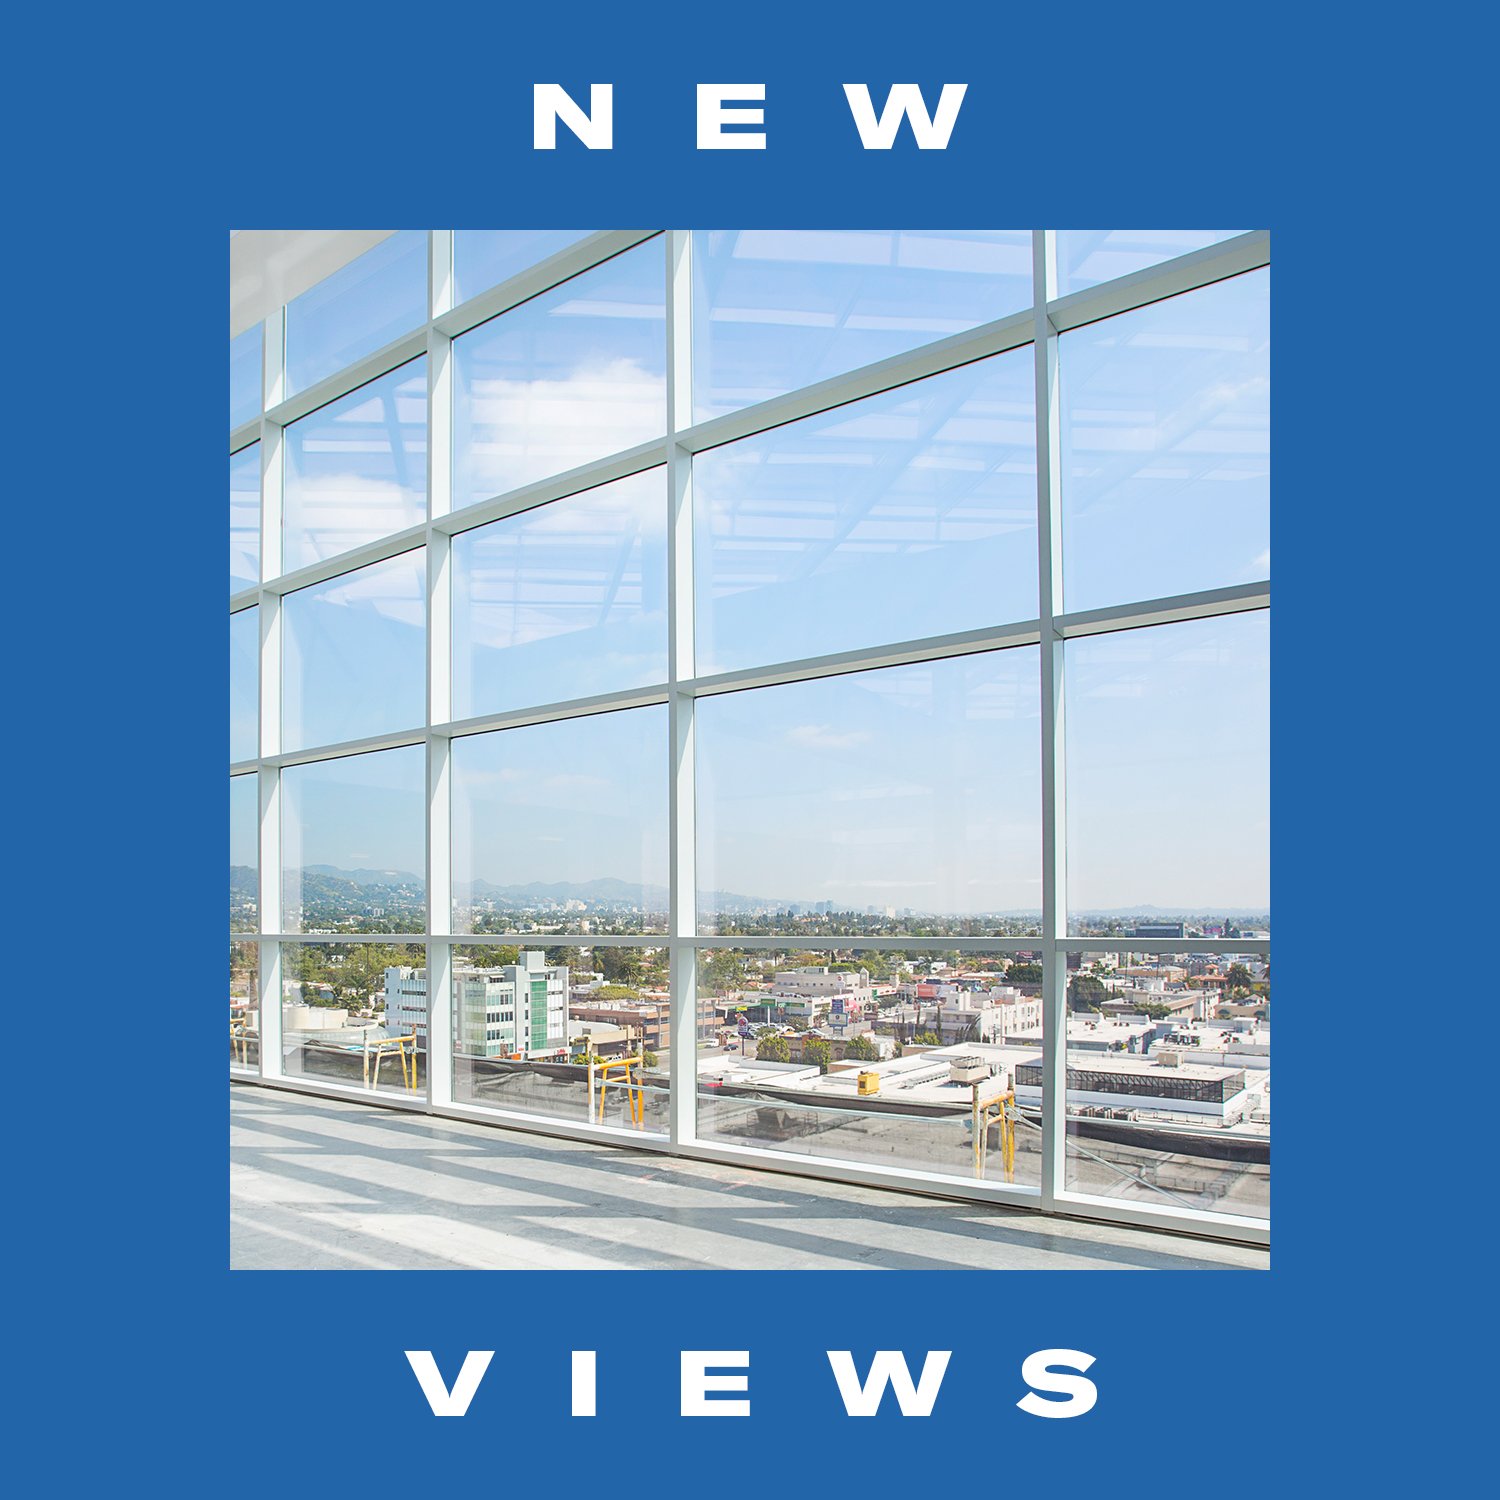 Beverly Center on Twitter: "We're new life (and light) into #BeverlyCenter, with floor-to-ceiling windows and a skylight that spans the entire center. Check out our progress - all stores are open